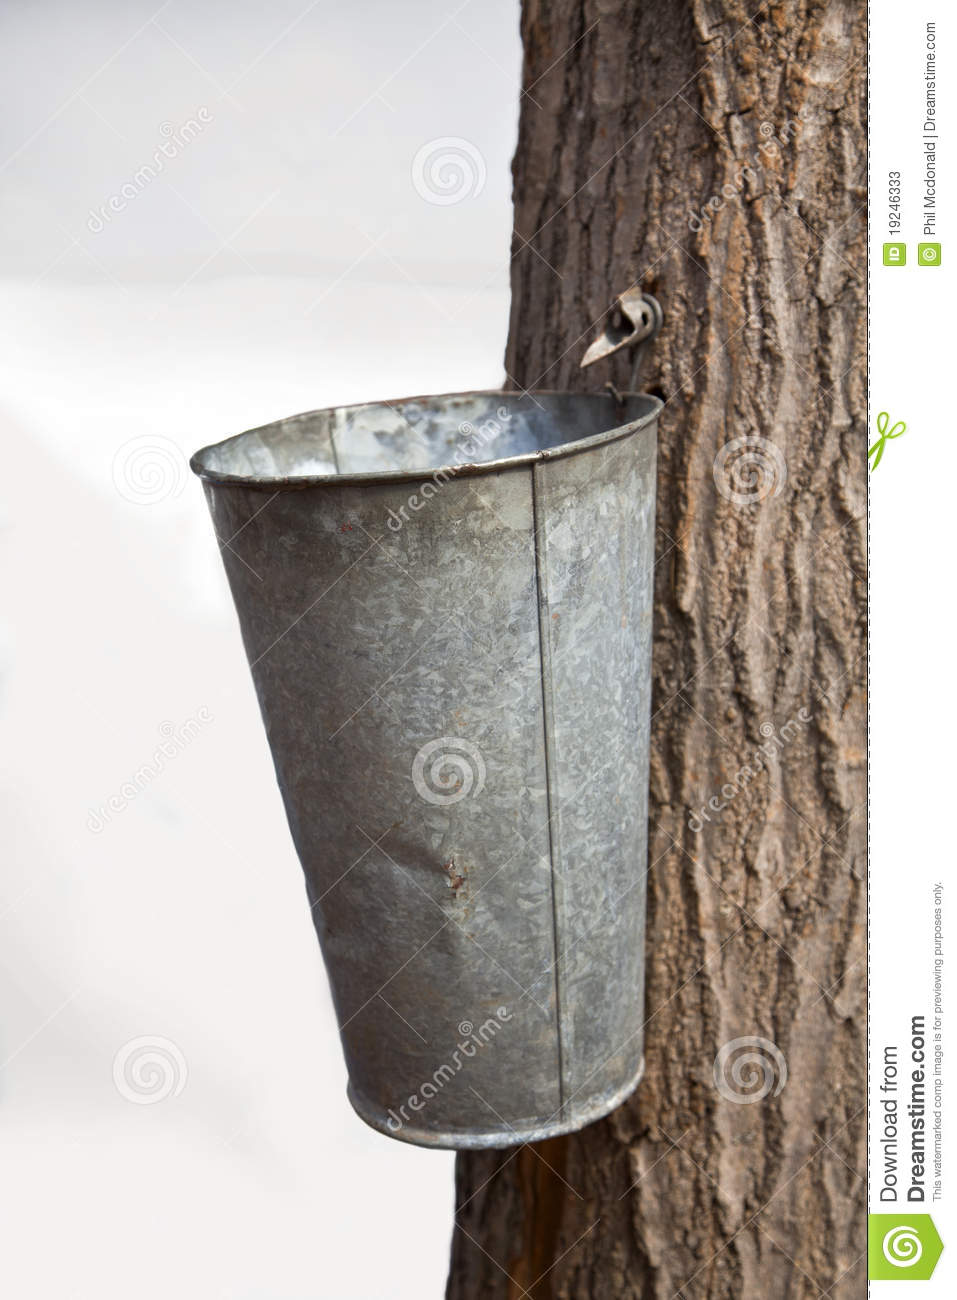 Spigot Tapped Into A Maple Tree To Collect Sap For Maple Syrup